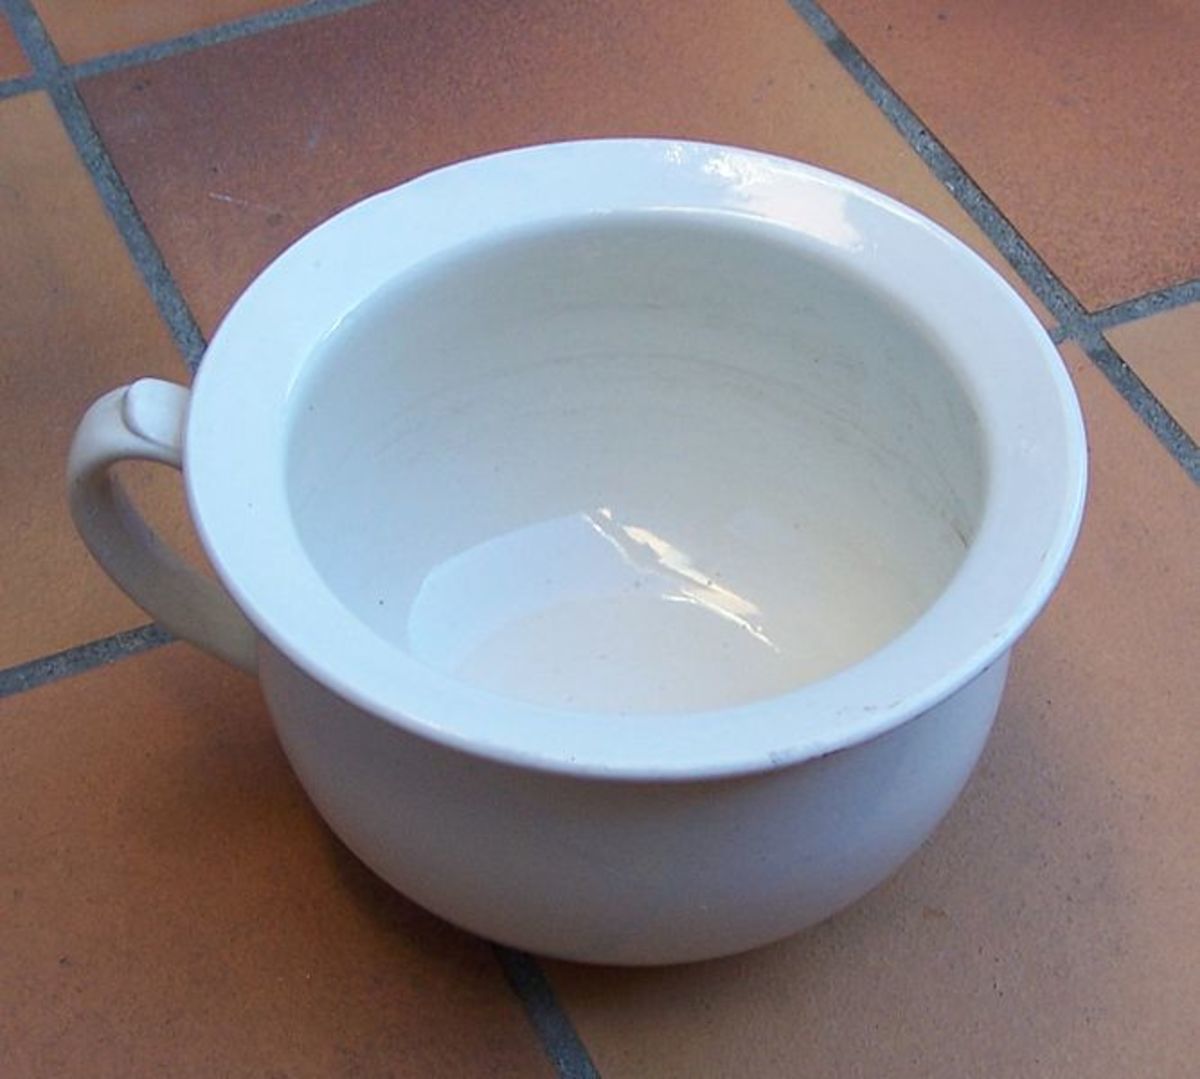 Old-fashioned chamber pot for overnight use